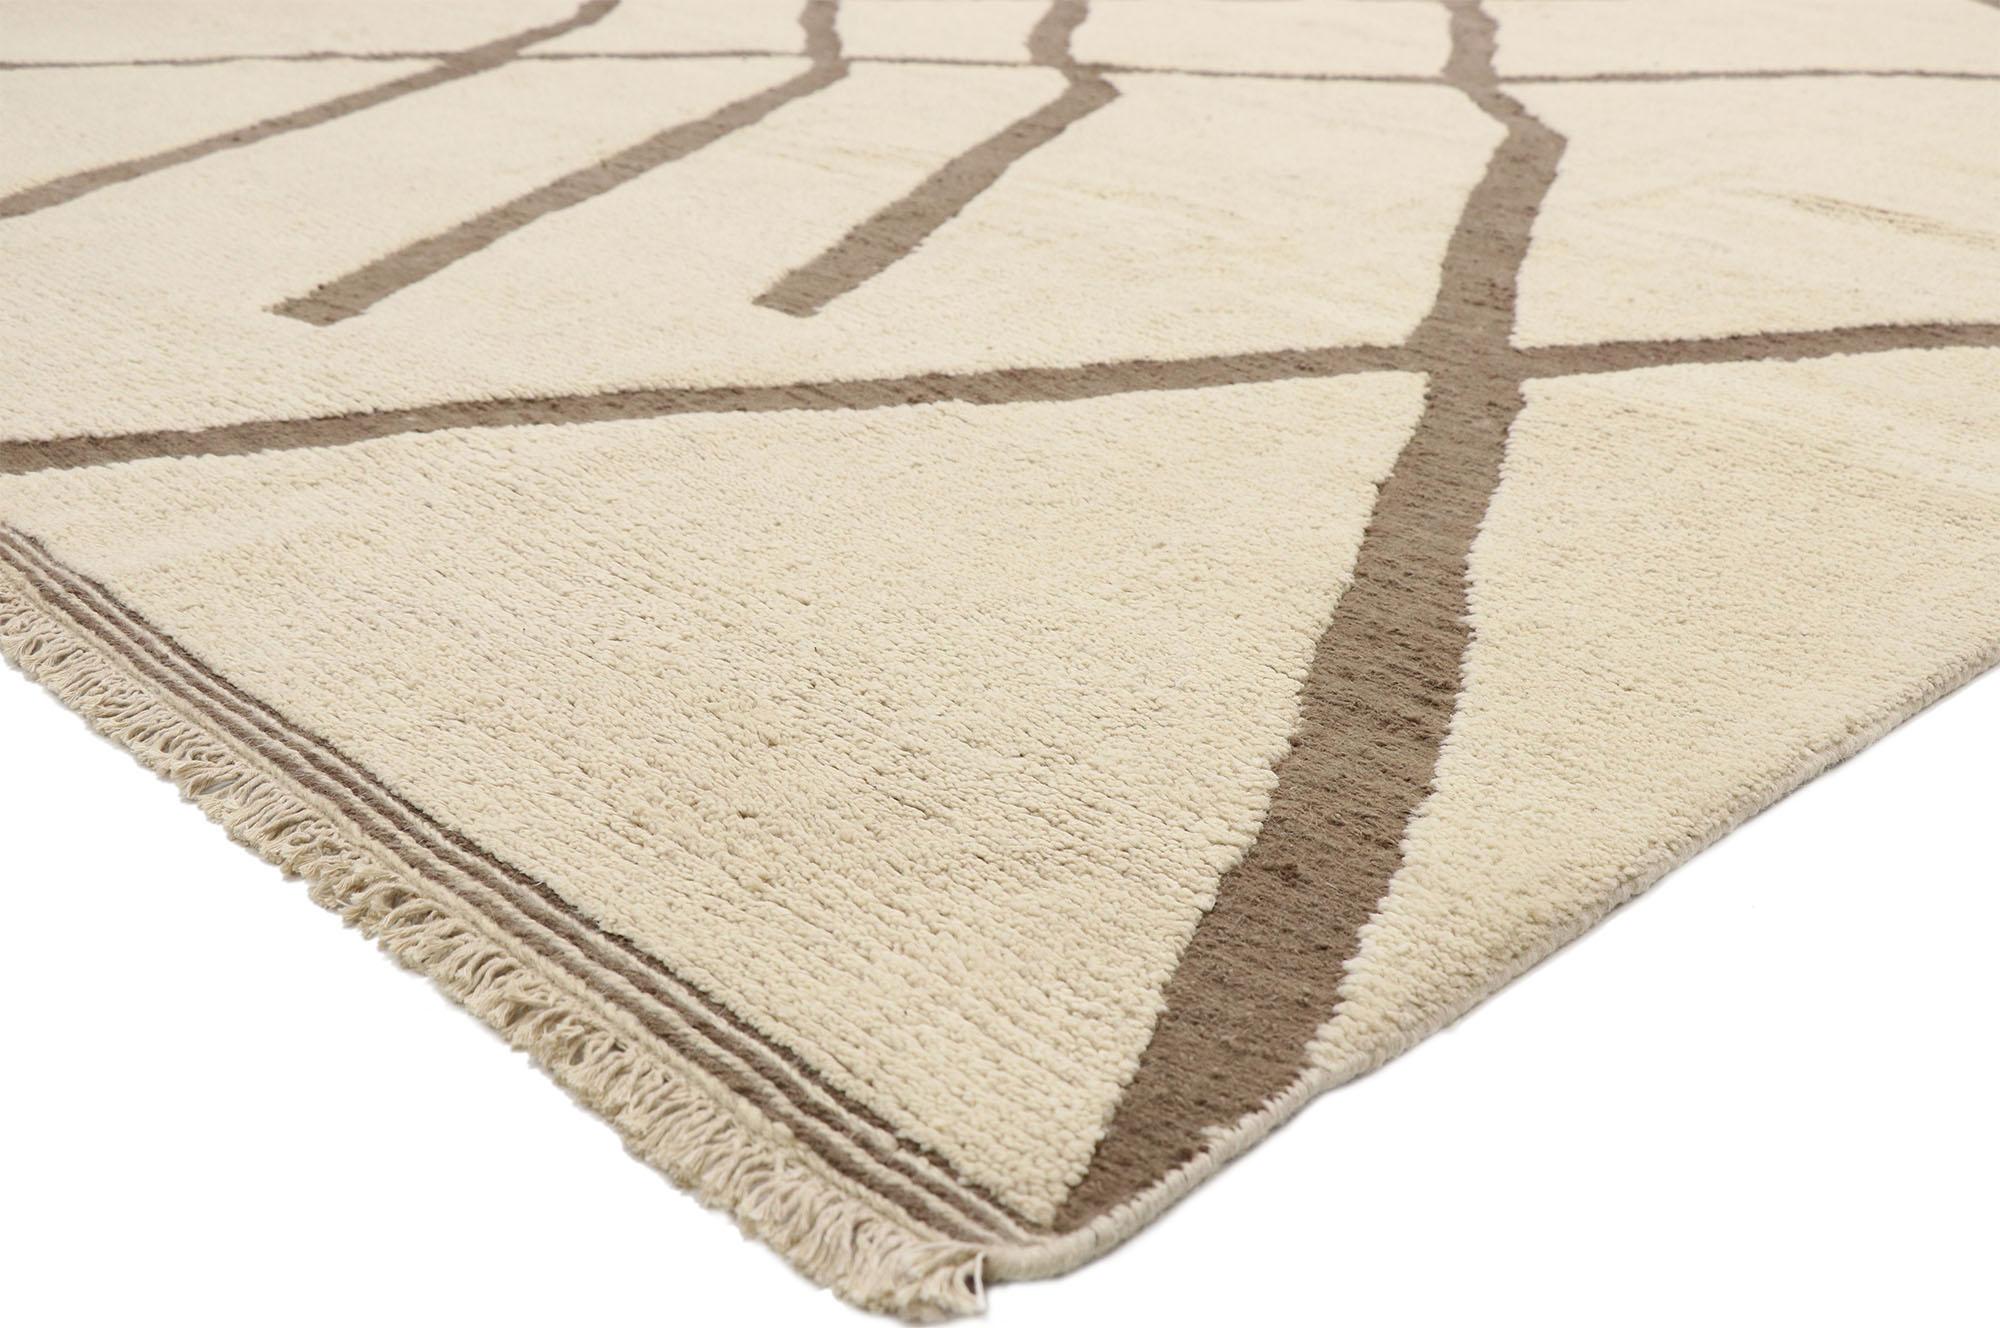 80528 Organic Modern Moroccan Rug, 09'11 x 13'08.
Wabi-Sabi meets organic modern style in this neutral Moroccan area rug. The perfectly imperfect lattice and earthy tones woven into this piece work together to provide a feeling of cozy contentment